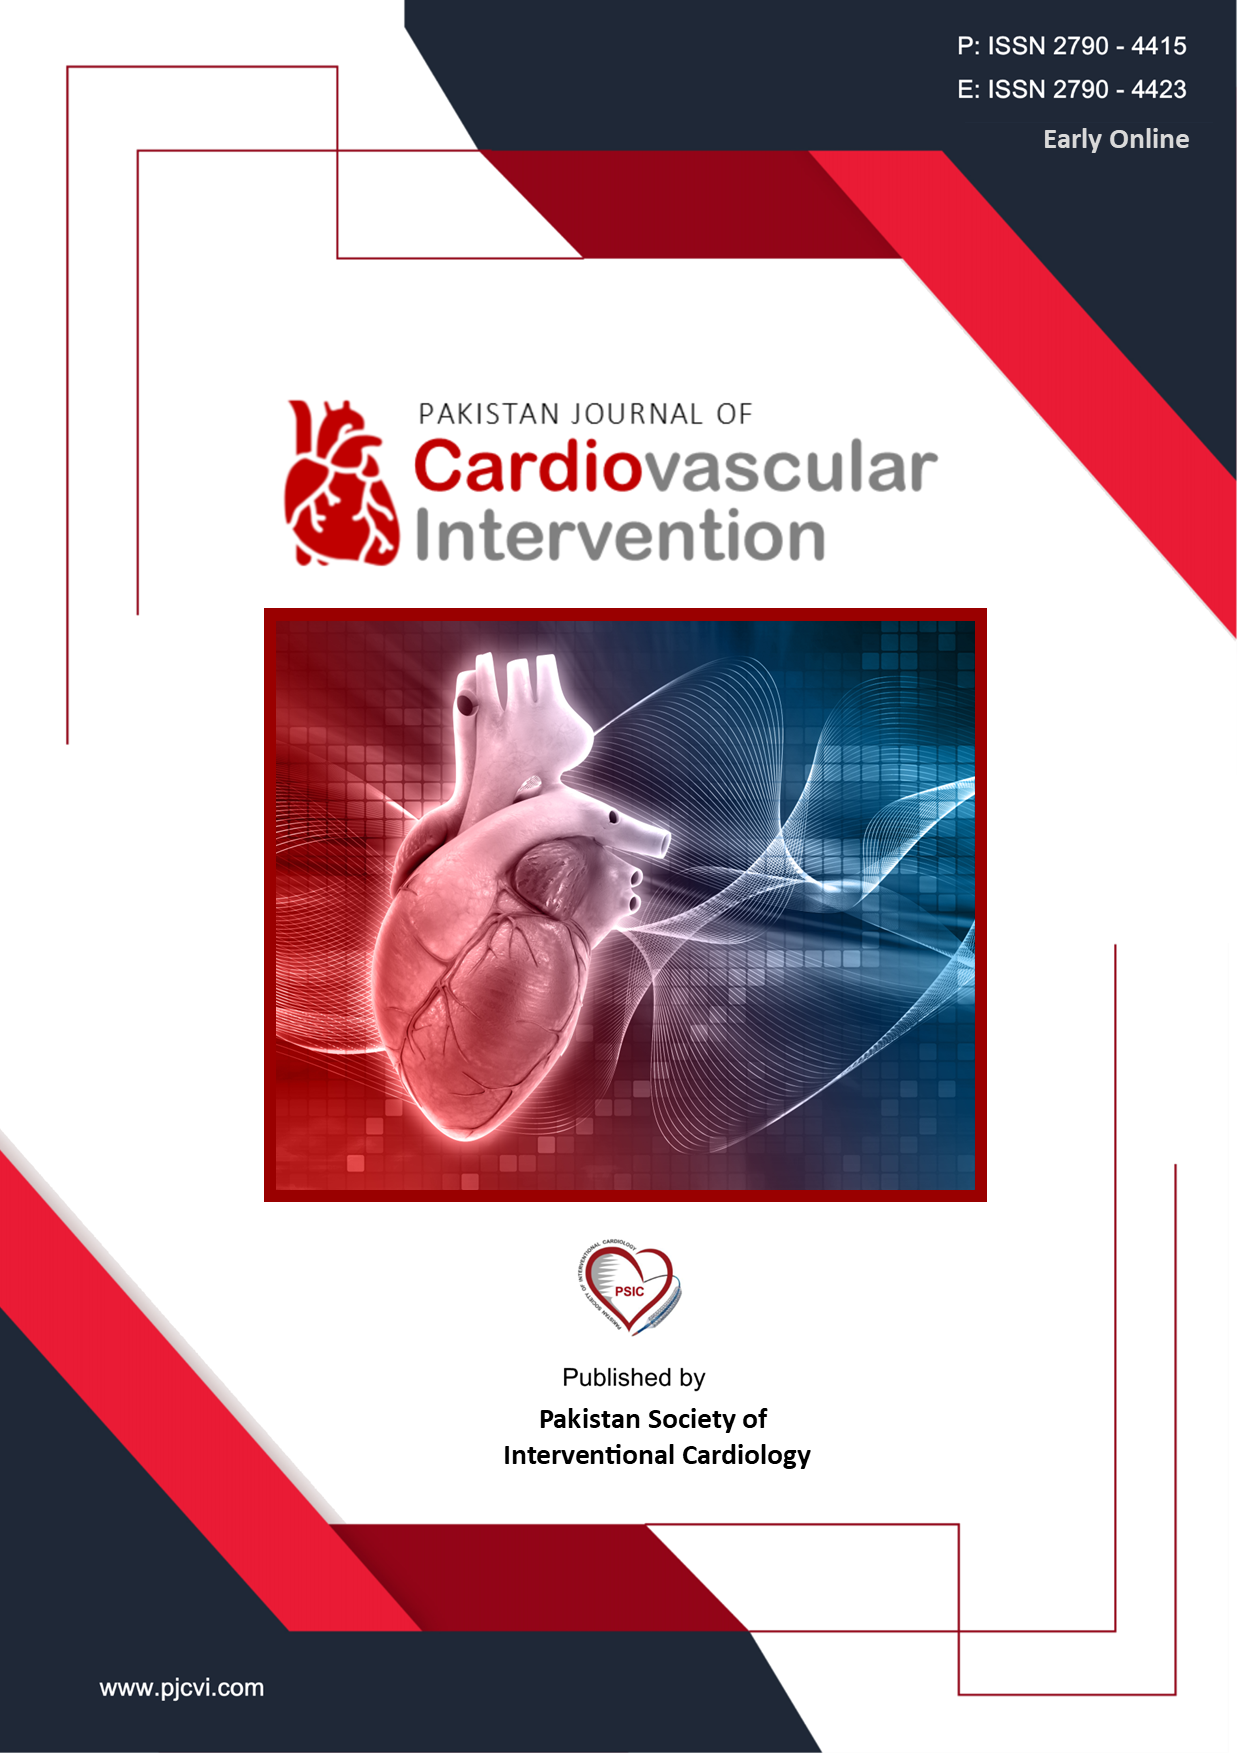 					View 2023: Pakistan Journal of Cardiovascular Interventions (Early Online)
				